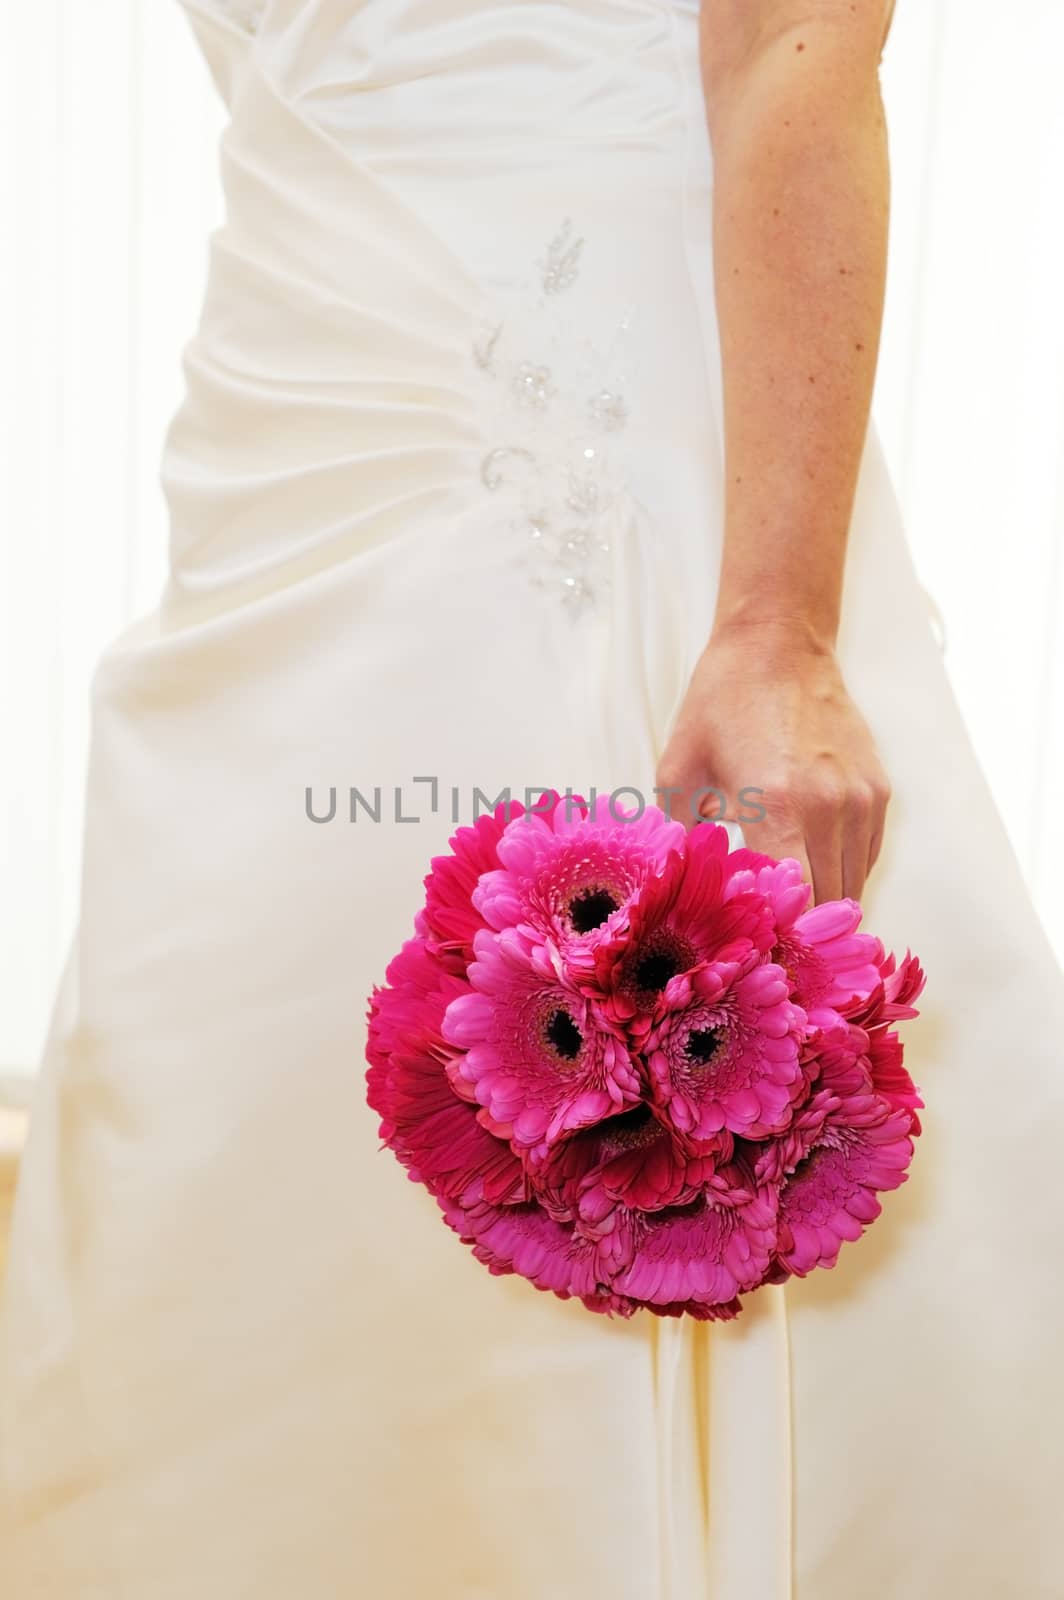 Bride holds pink bouet of flowers on wedding day